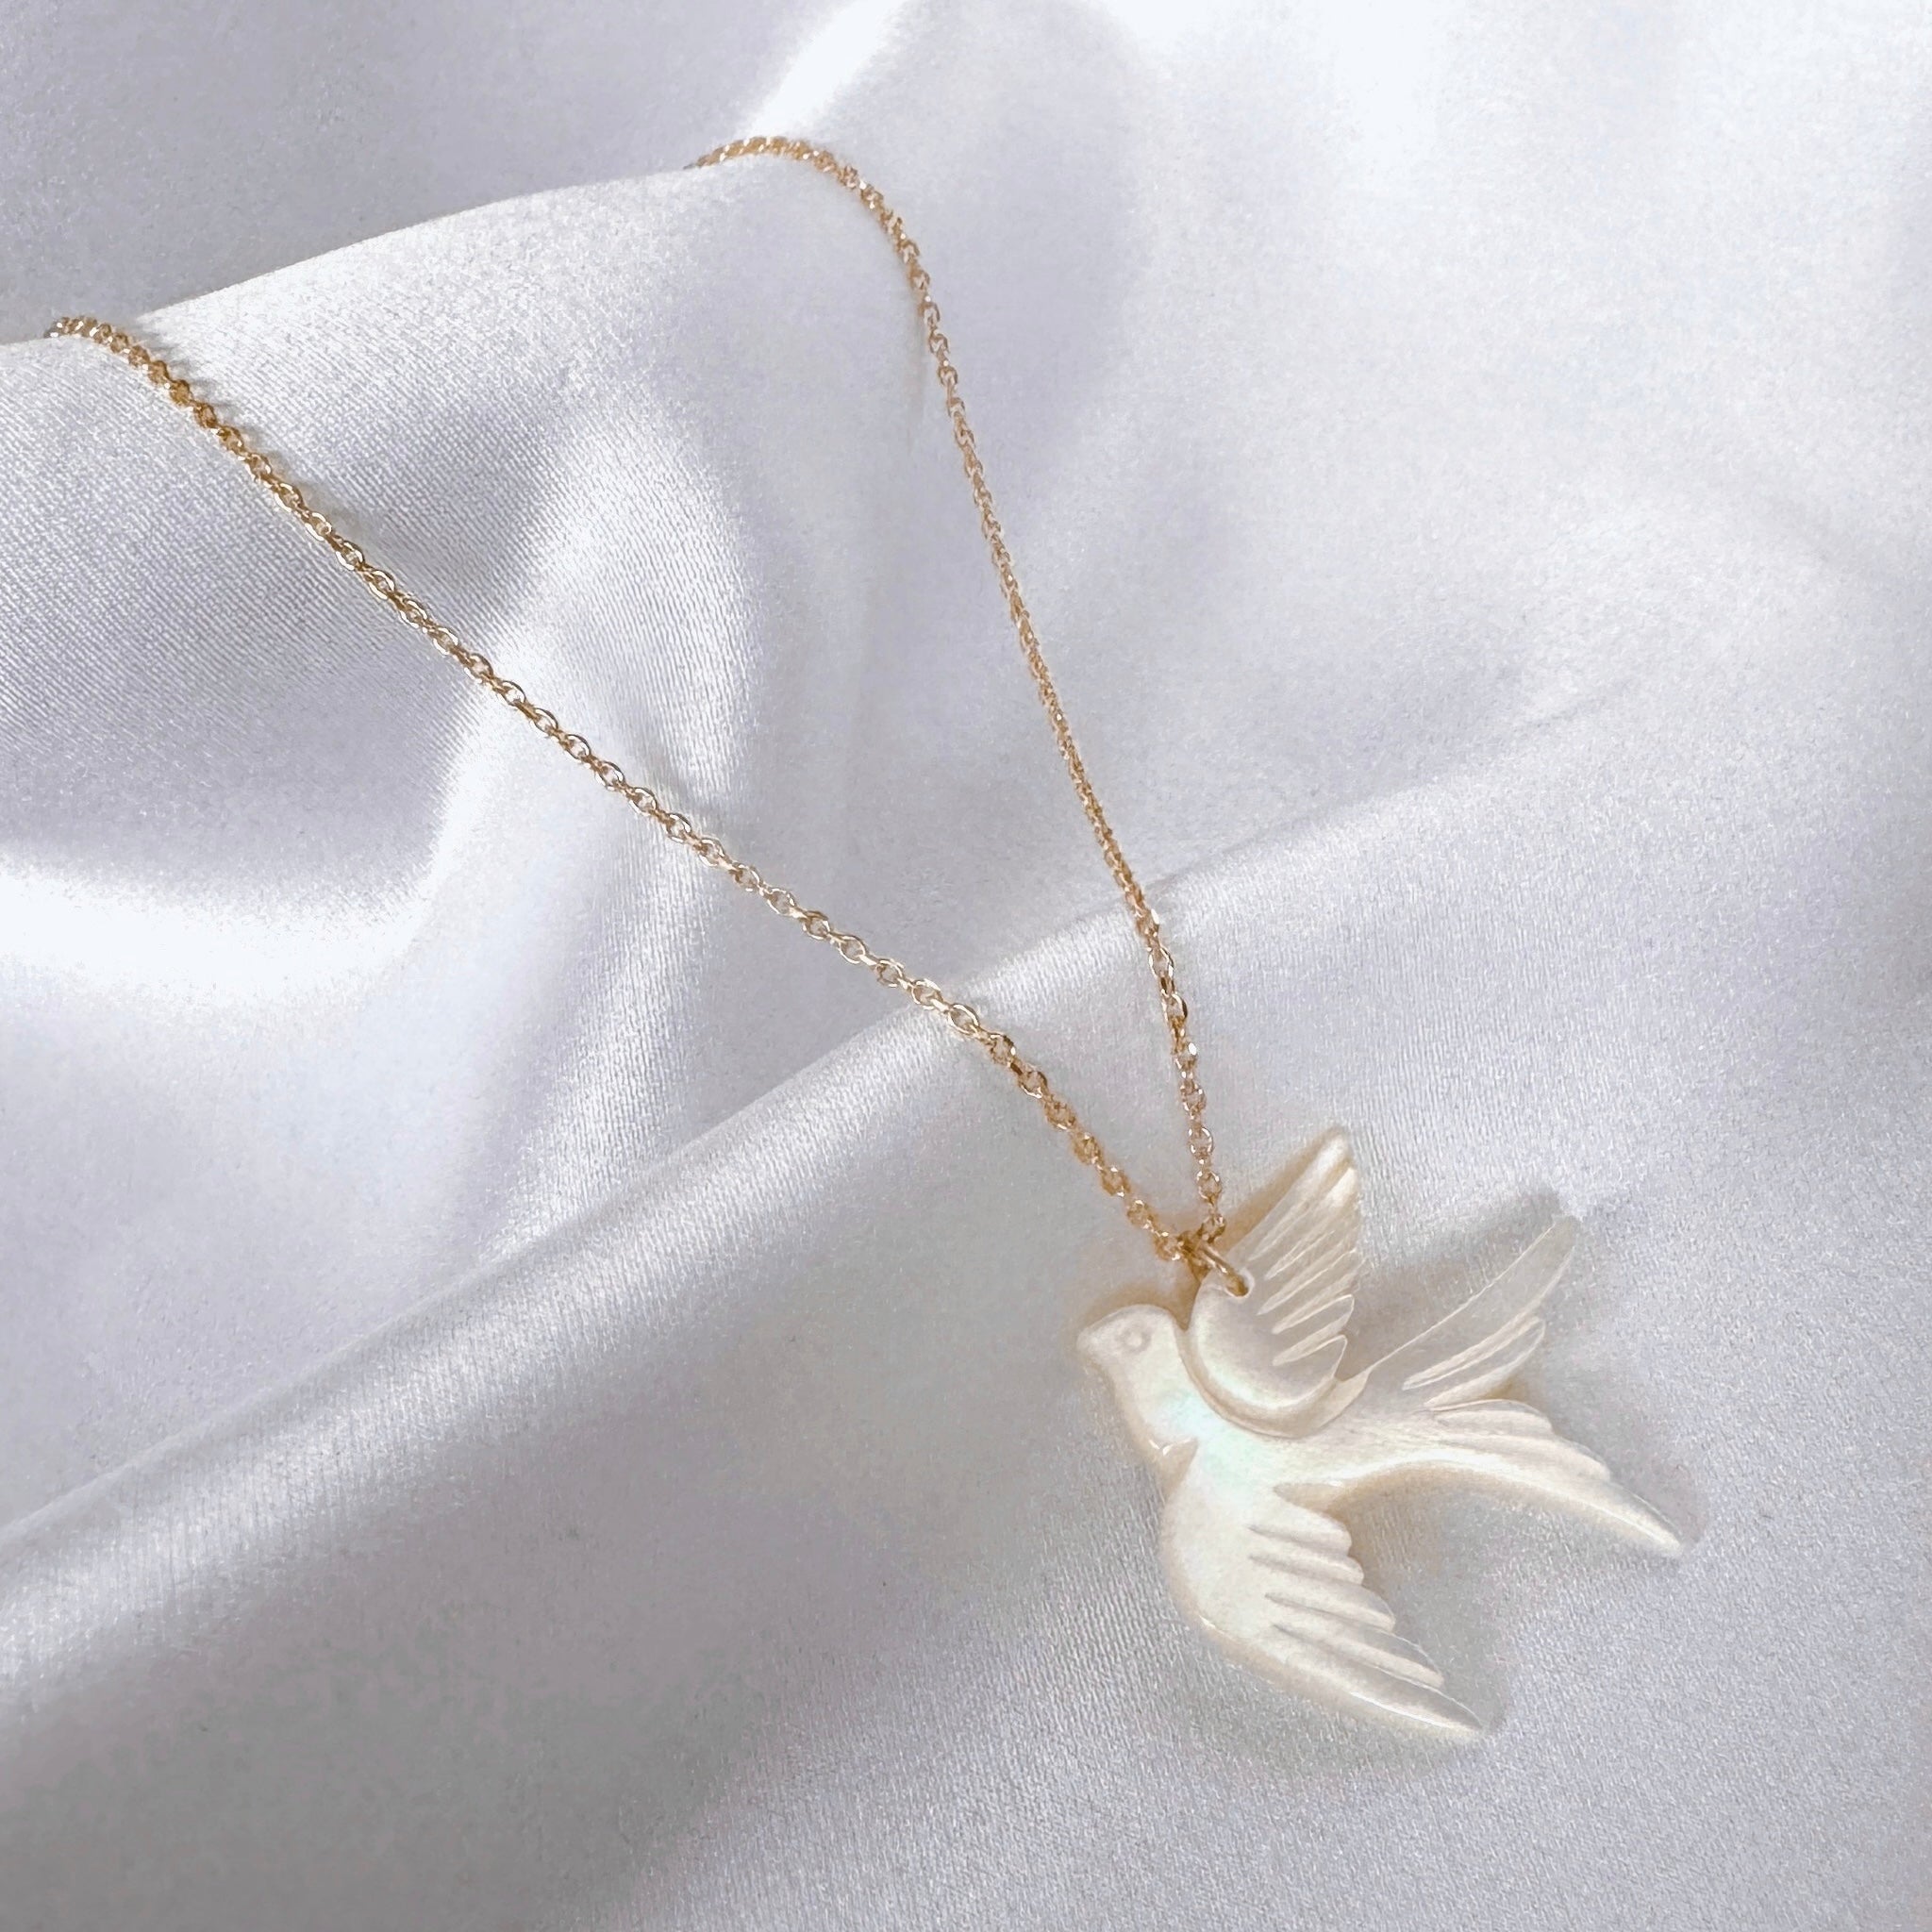 Gold-plated “Swallow” necklace